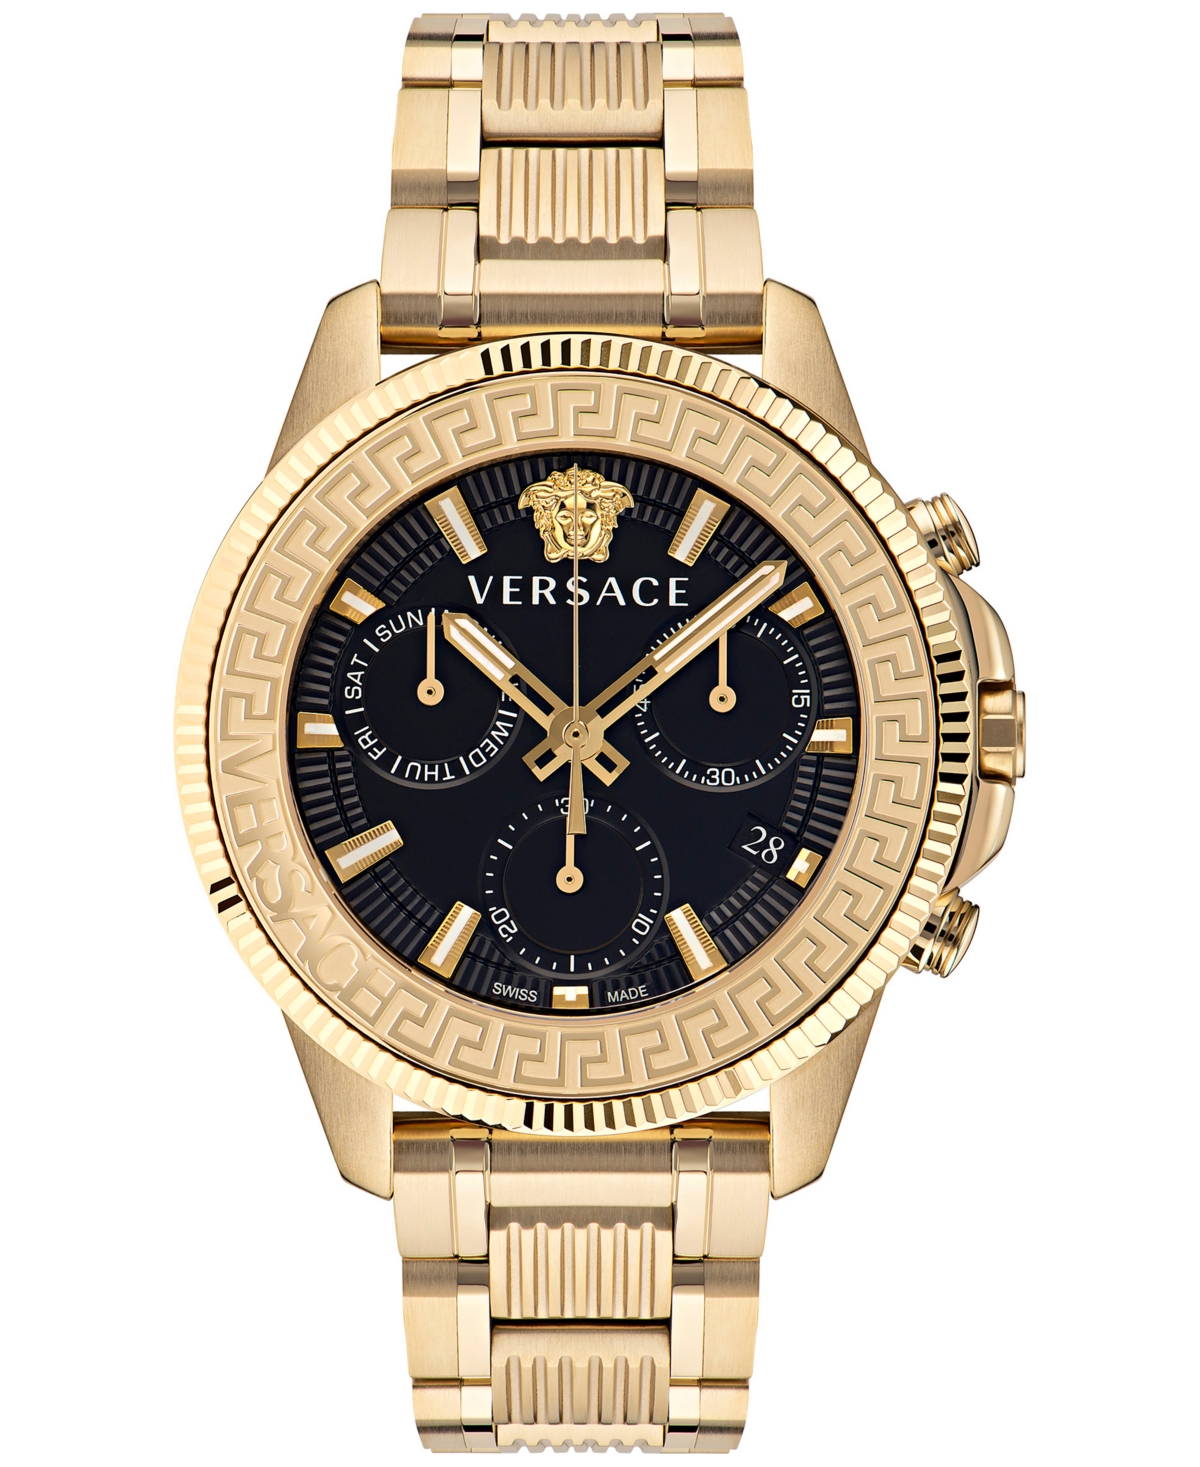 VERSACE MEN'S SWISS CHRONOGRAPH GRECA ACTION GOLD ION PLATED STAINLESS STEEL BRACELET WATCH 45MM